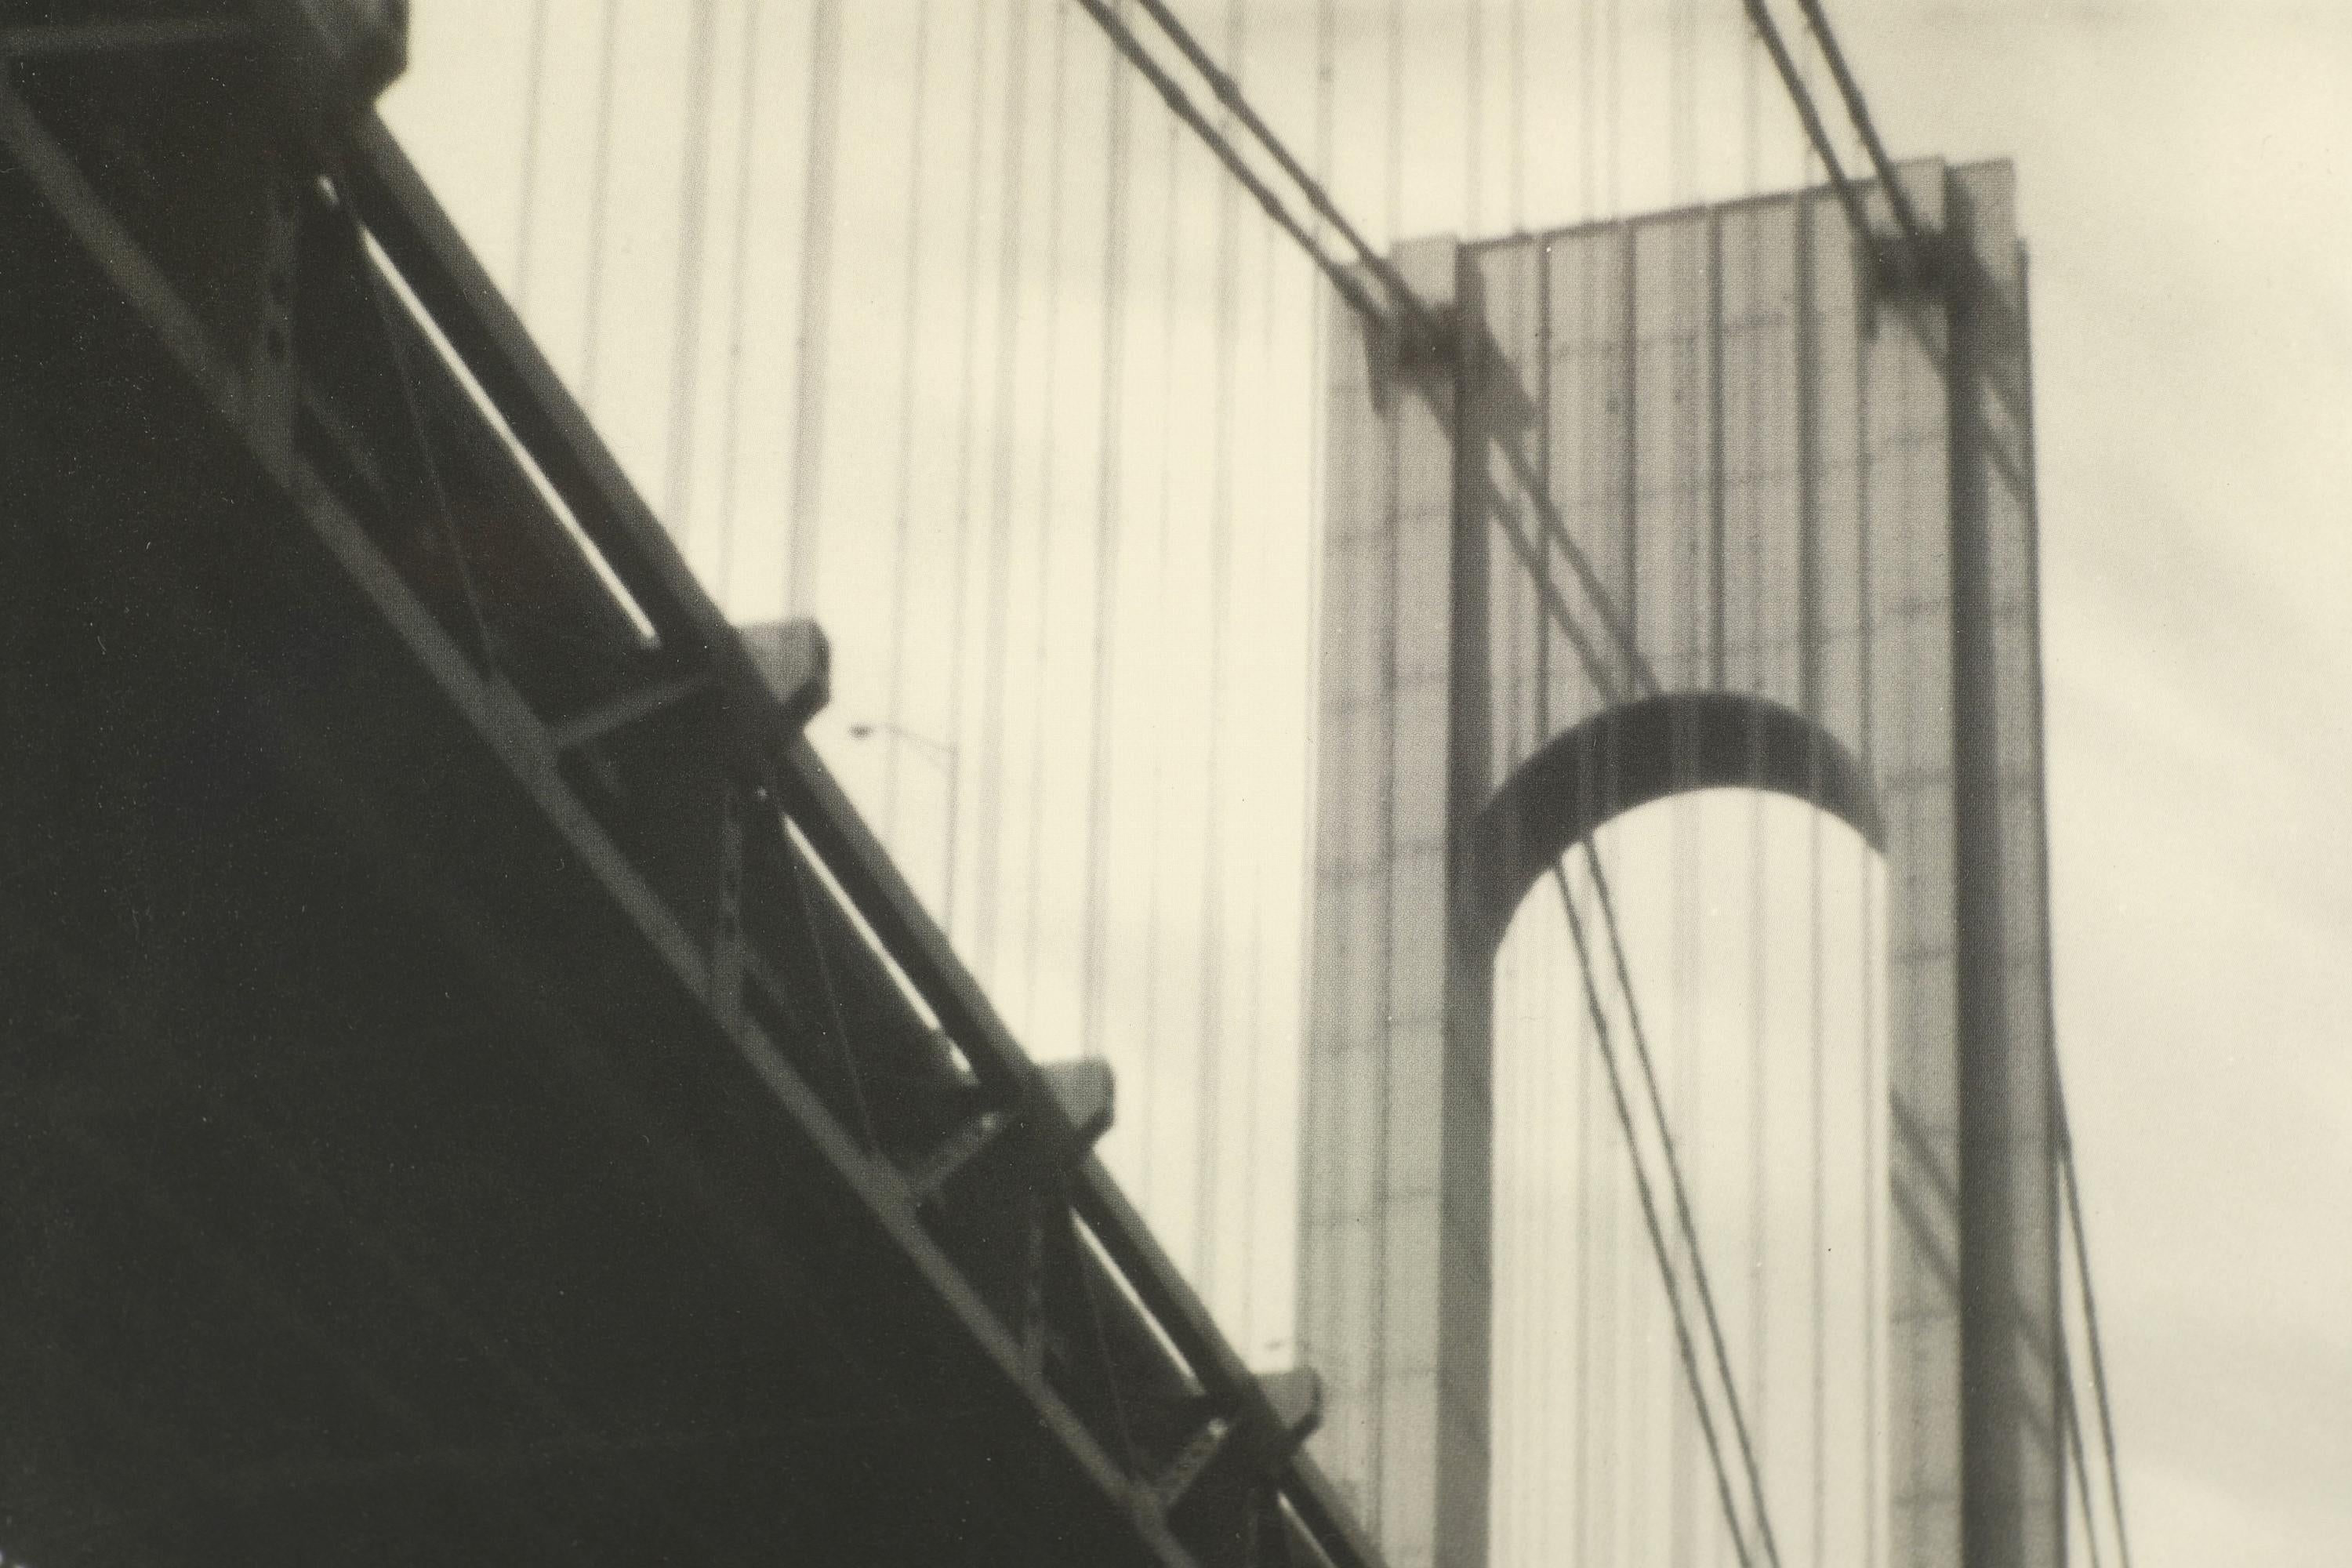 20th century Early image of The Verrazano Bridge matted and mounted in a wood frame. Originally hung on the corridor walls of The Hotel Pennsylvania across from Madison Square Garden. Minor chips. Please see the images. Please note, this item is